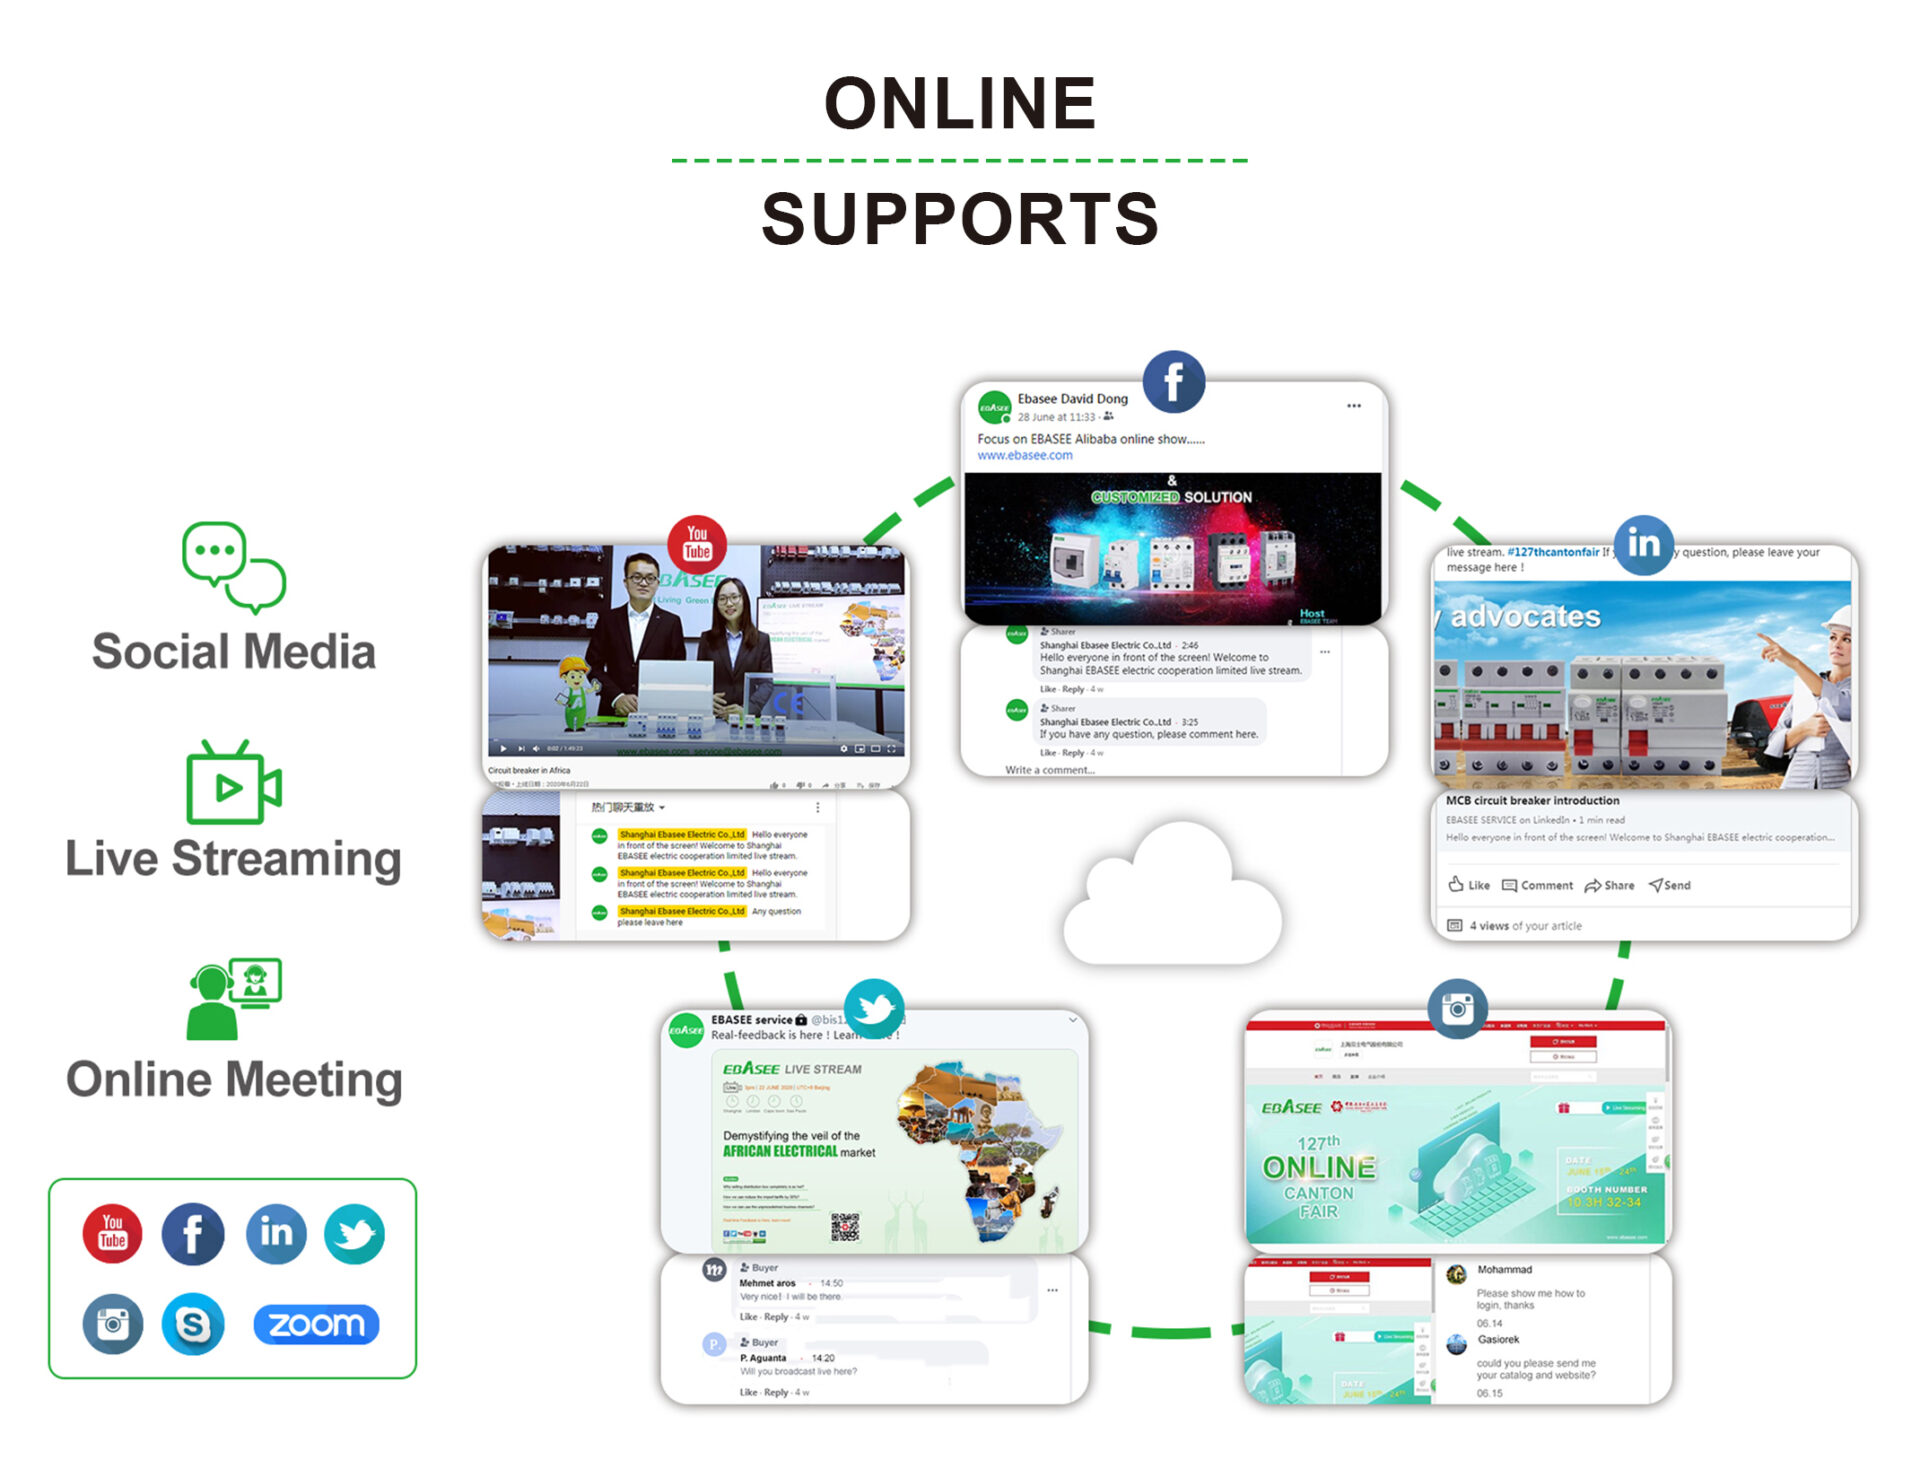 ONLINE SUPPORTS